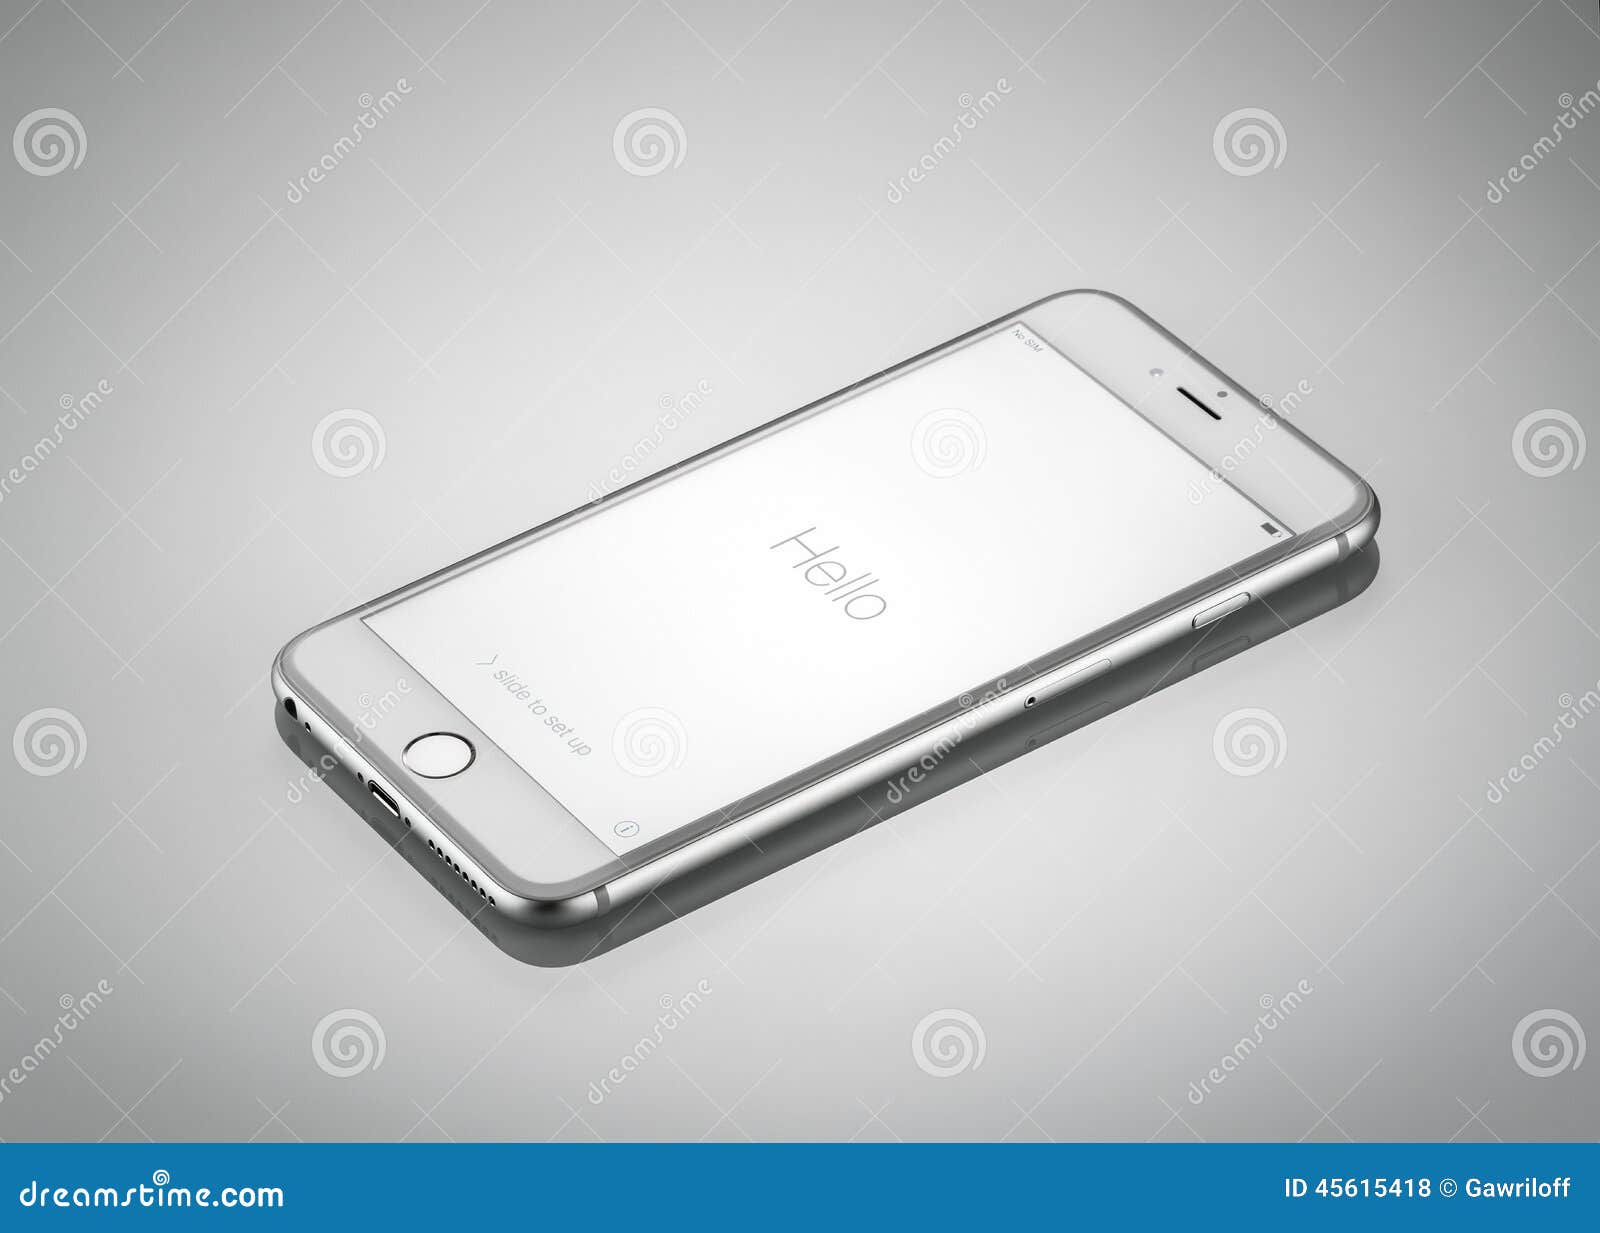 New Apple IPhone 6 Plus Front Side Editorial Stock Photo - Image of ...